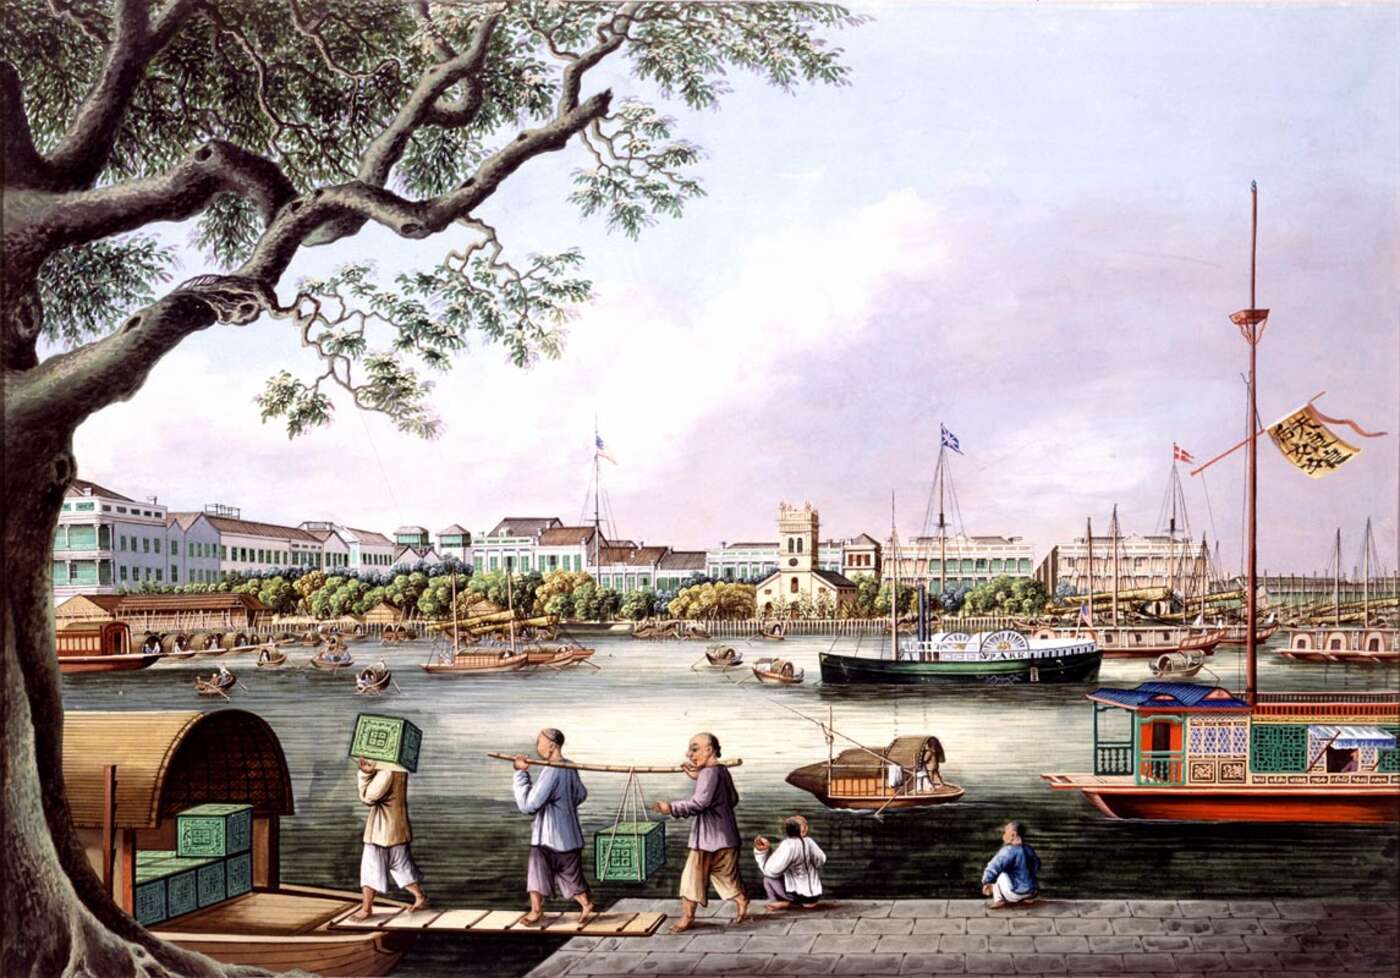 "Loading Tea at Canton" by Tinqua (active 1830s–1870s) - http://ocw.mit.edu/ans7870/21f/21f.027/rise_fall_canton_04/gallery_places/pages/cwC_1852c_E83553_Tea.htm. Licensed under Public Domain via Wikimedia Commons - https://commons.wikimedia.org/wiki/File